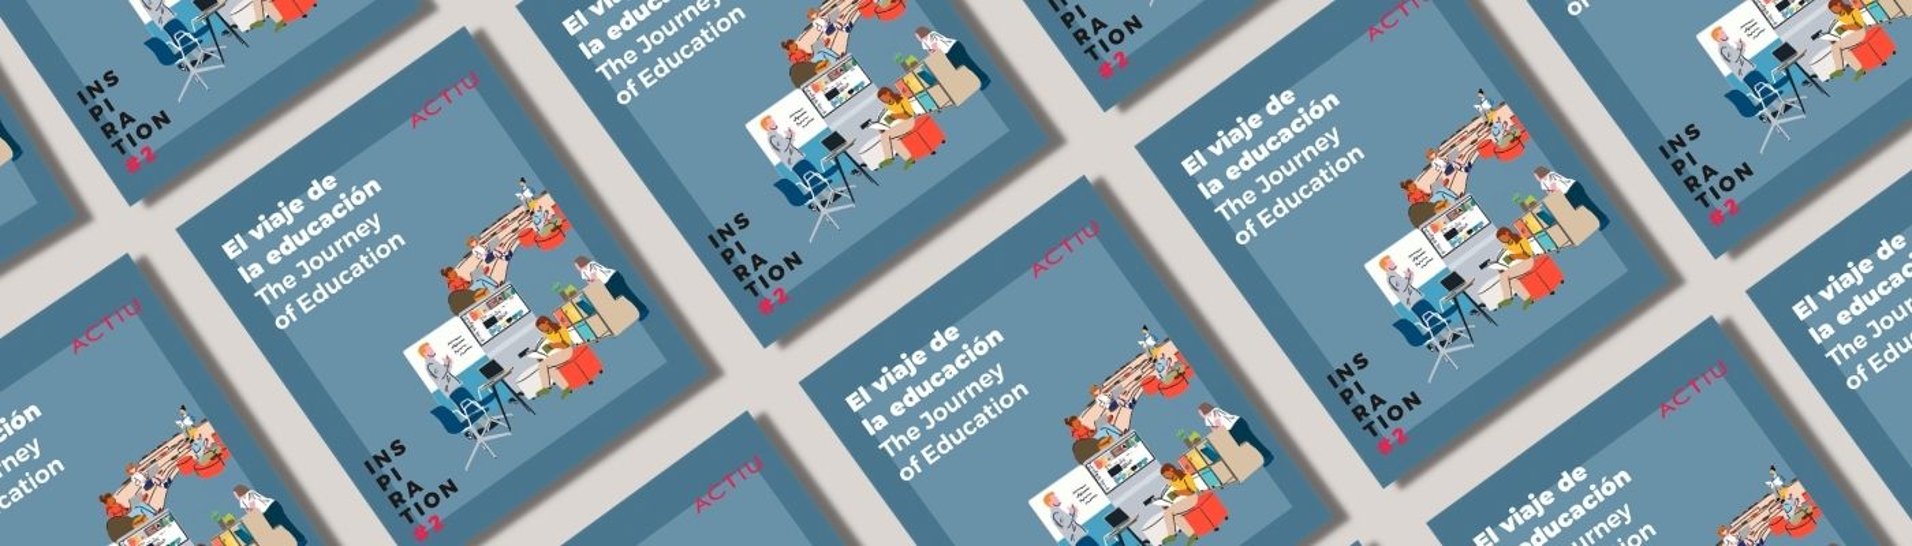 Guide: The Journey of Education, towards the Design of a New Education